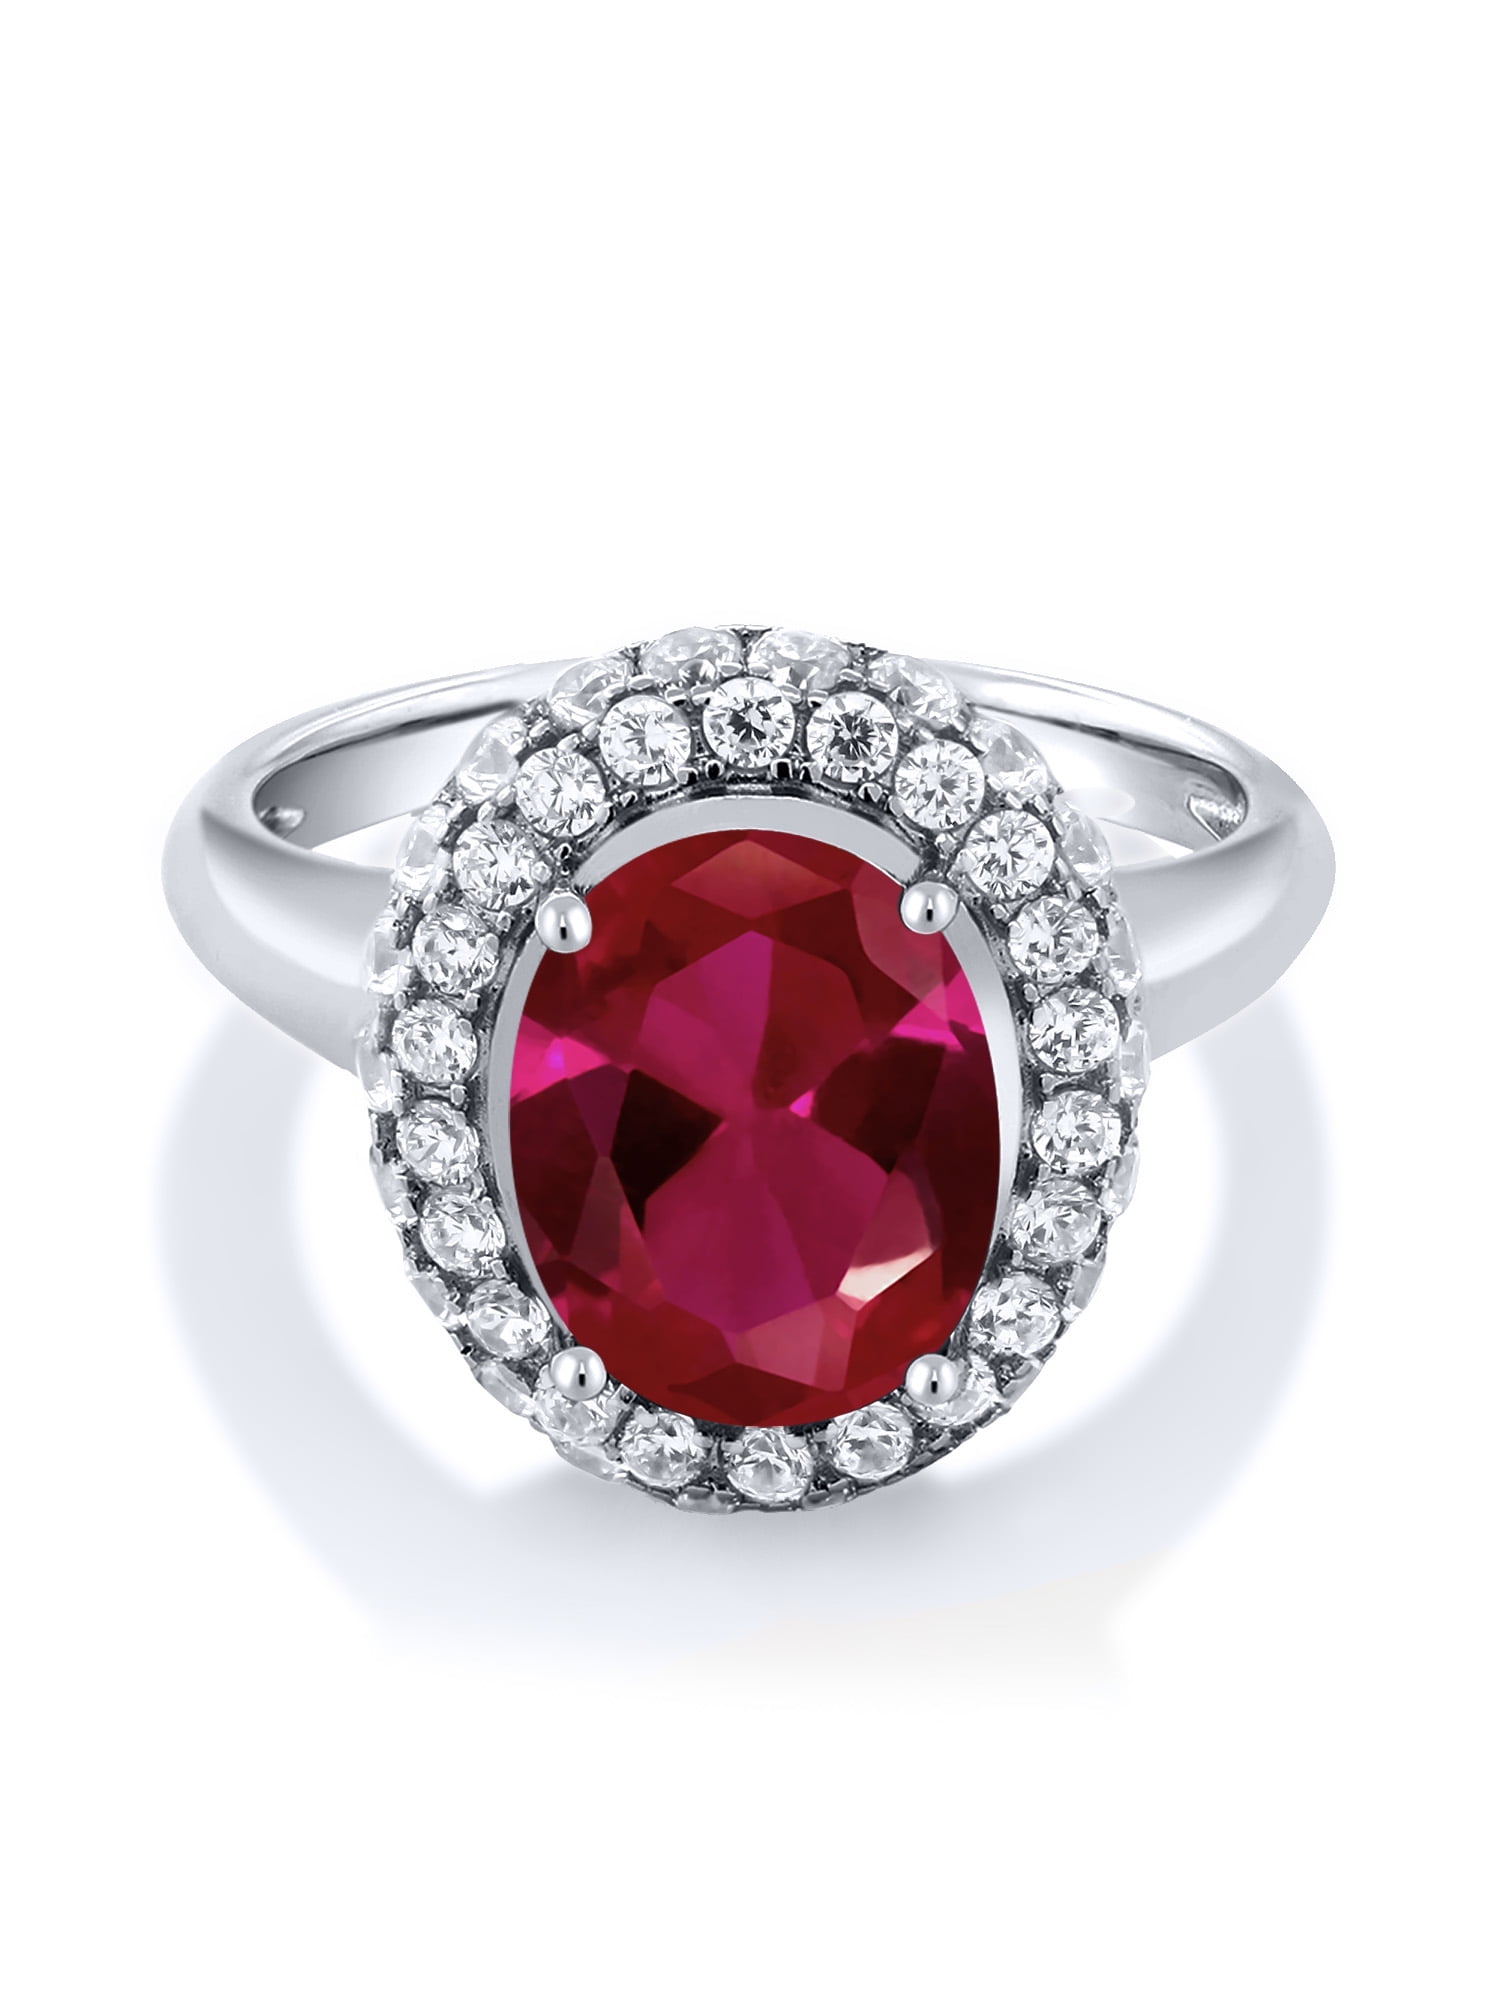 Gem Stone King 4.72 Ct Oval Red Created Ruby 925 Sterling Silver Ring